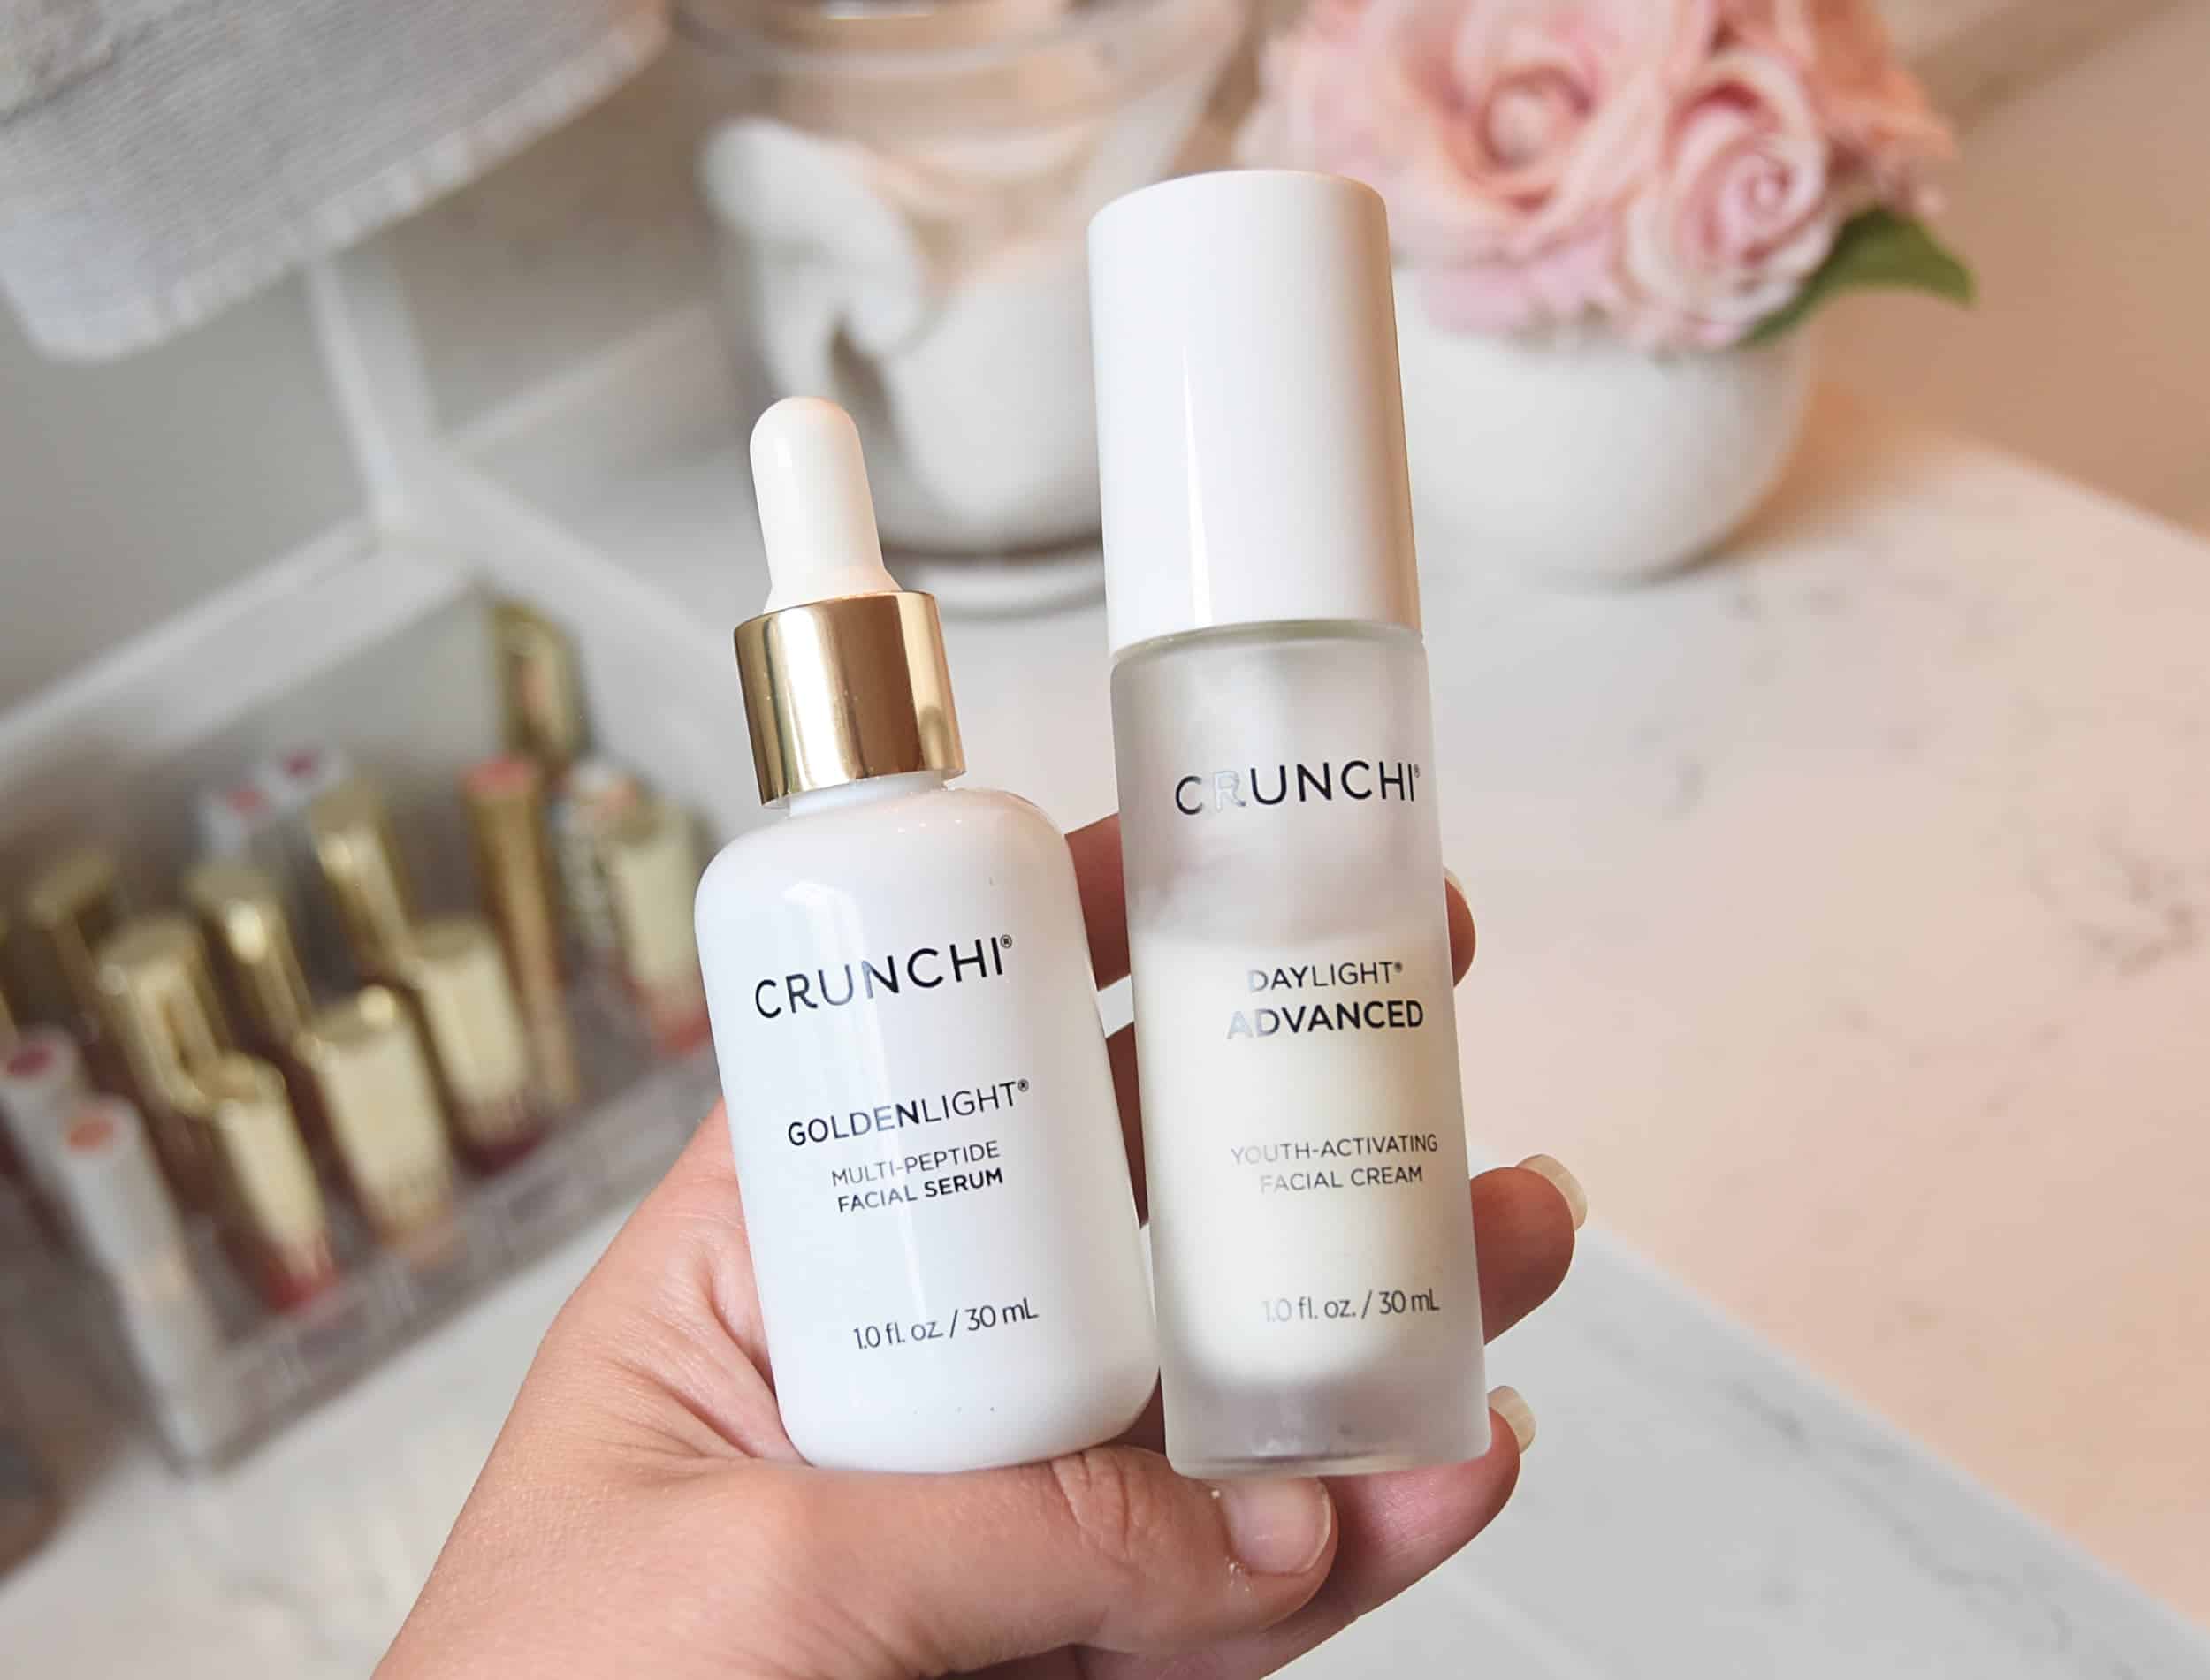 Alternative products for Beautycounter's anti-aging Countertime line.